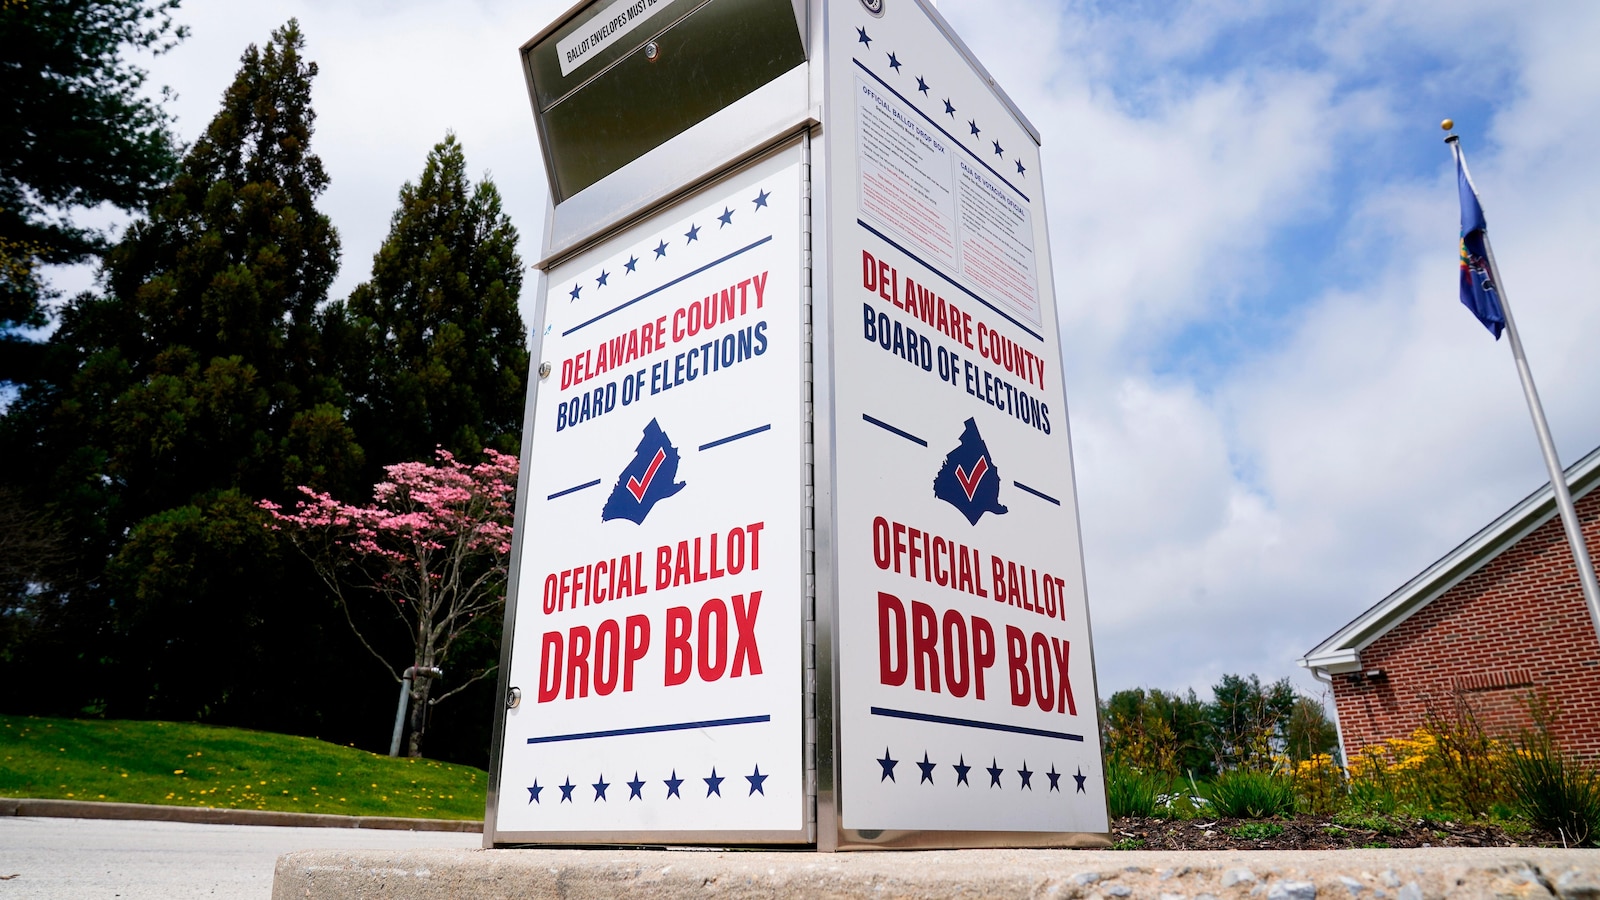 Pennsylvania's mail-in ballot dating rule is legal under civil rights law, appeals court says